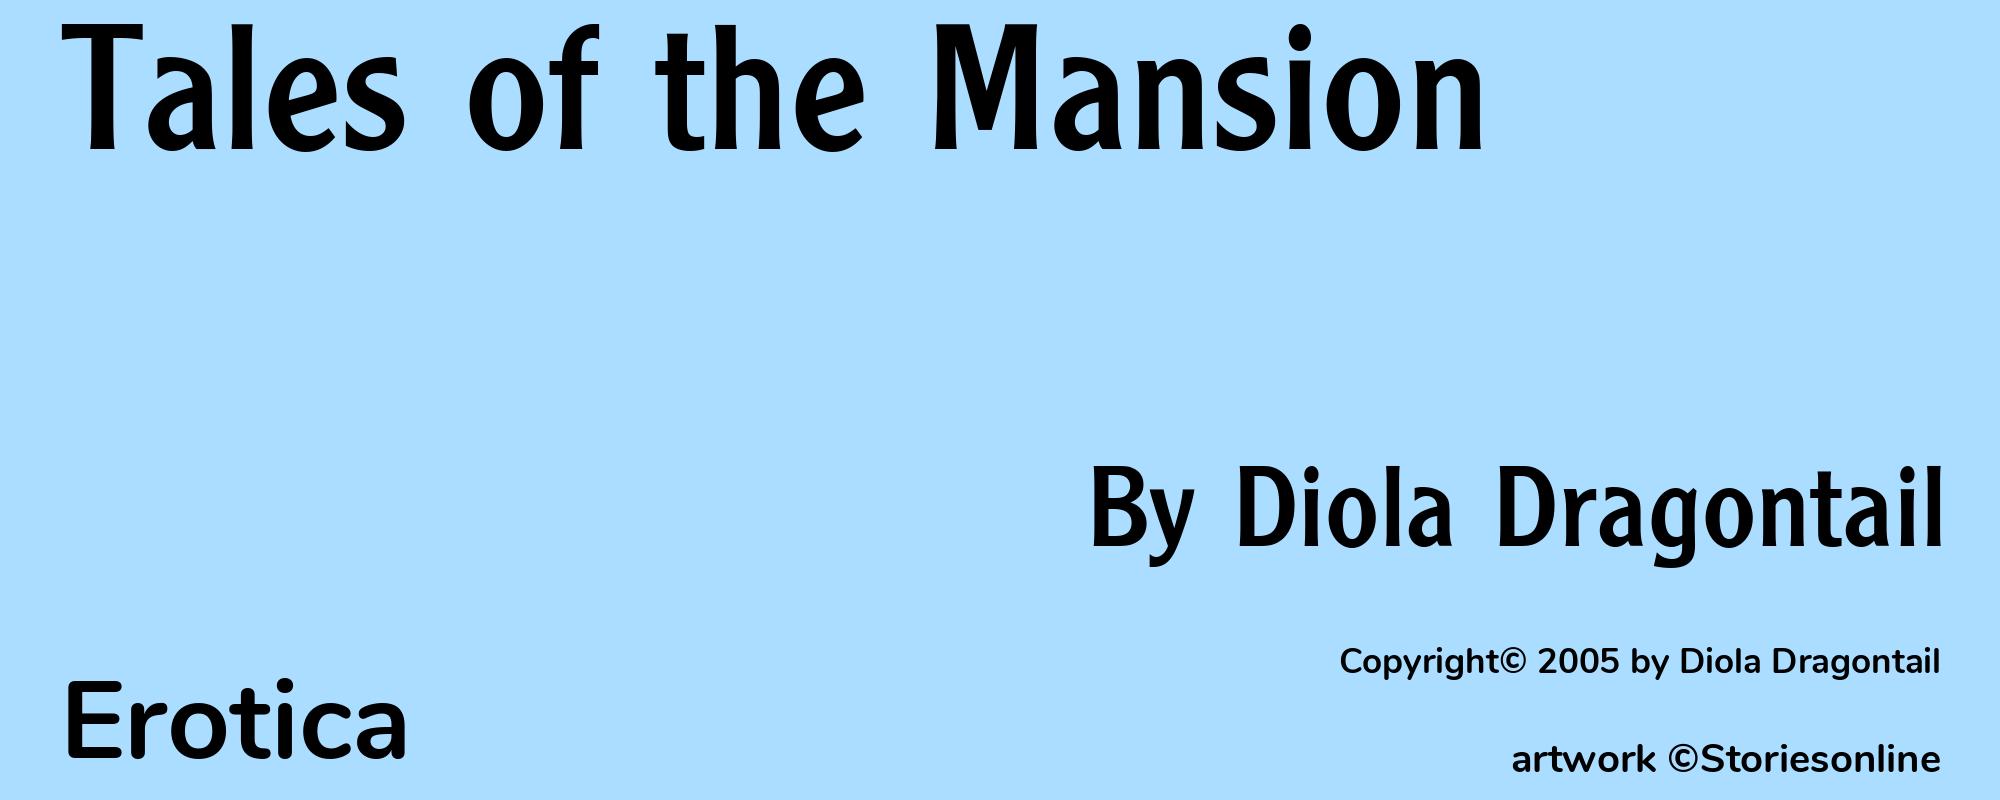 Tales of the Mansion - Cover